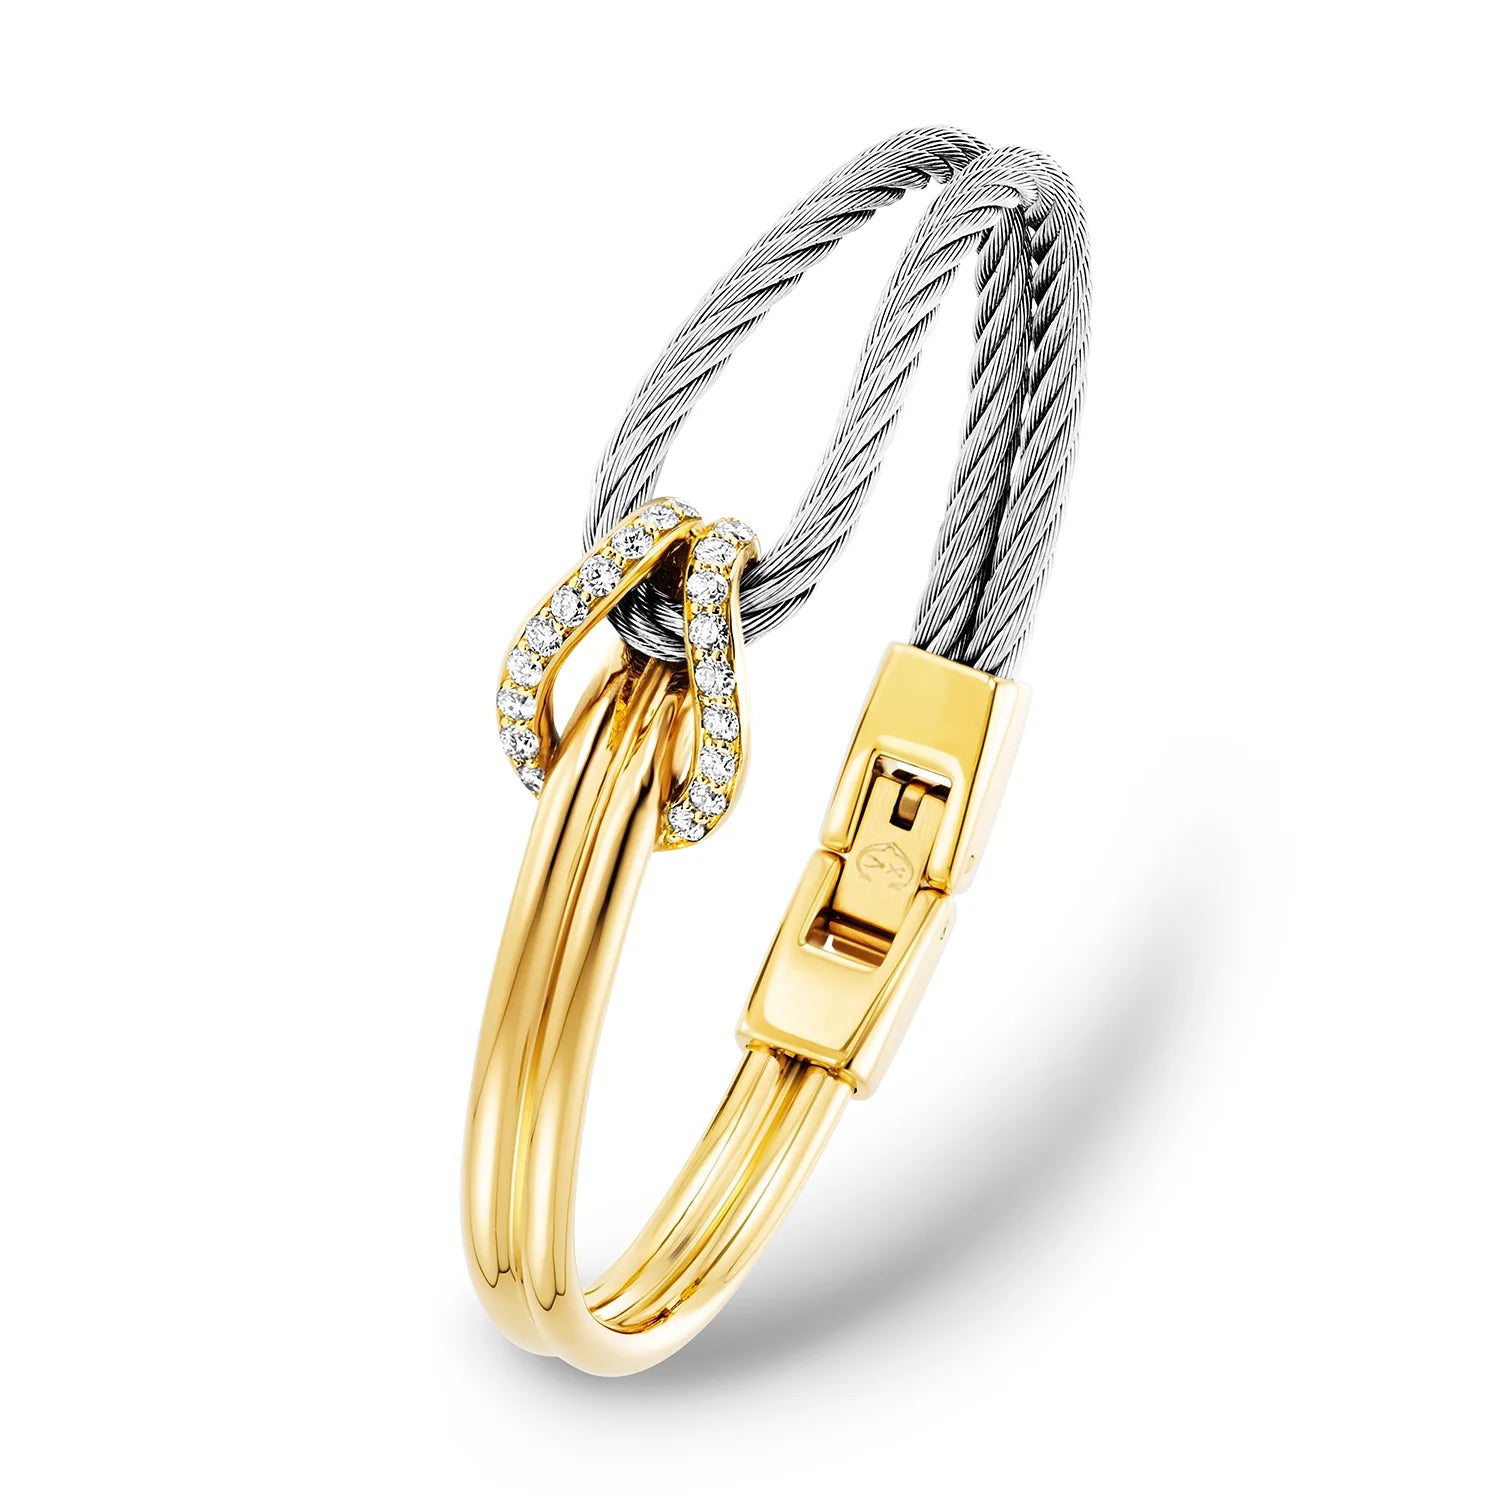 Steel_Gold 18KT with 22 Diamonds 0.73ct